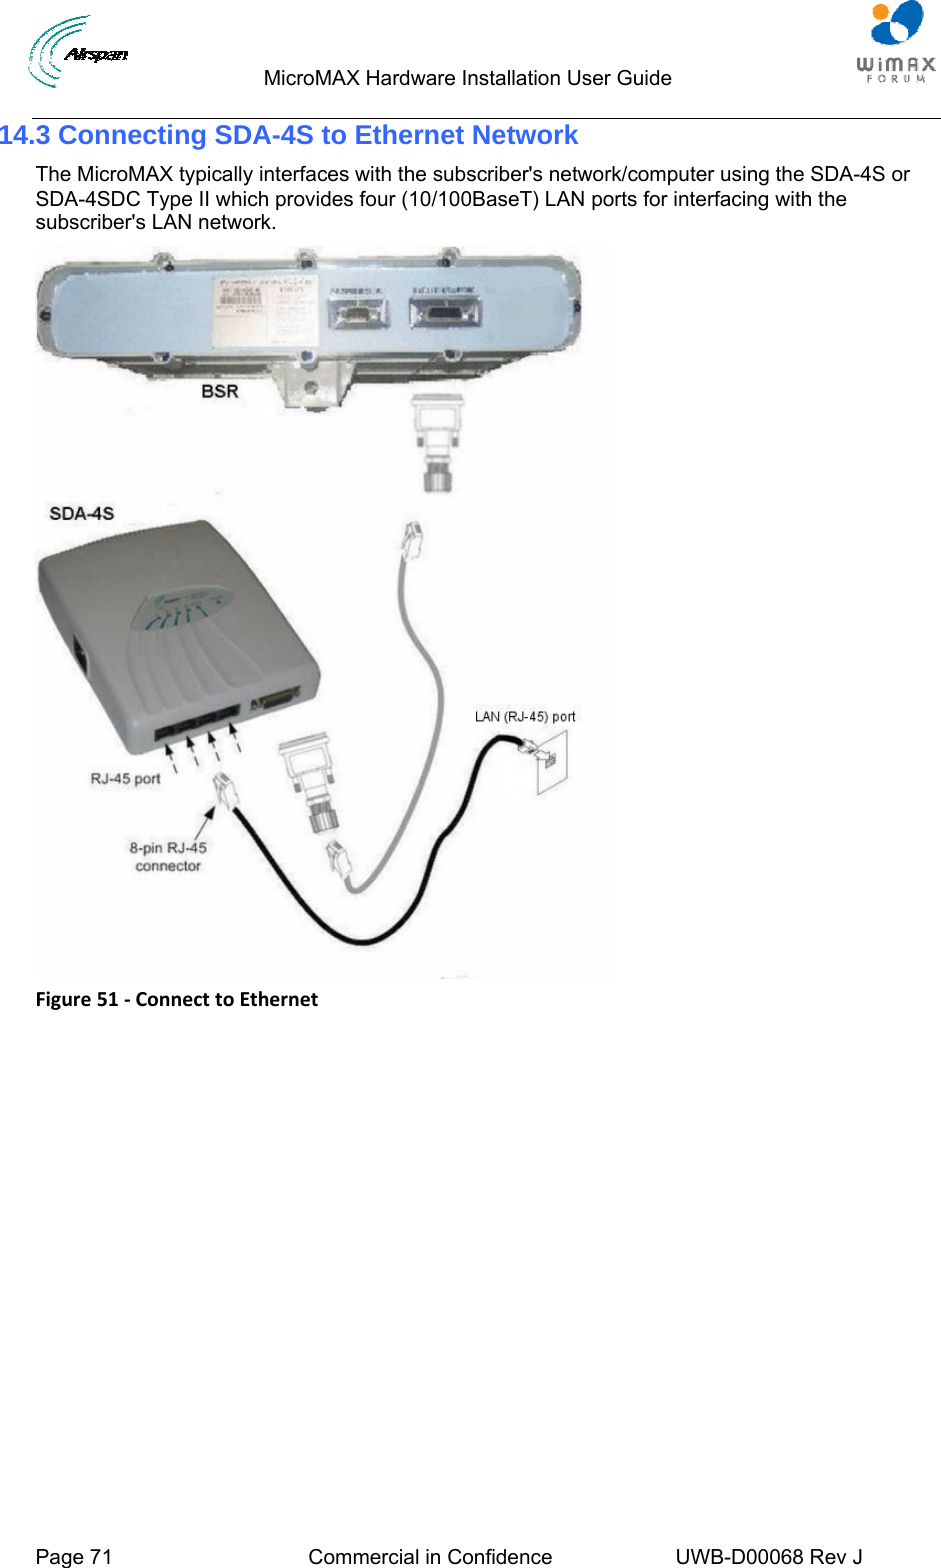                                  MicroMAX Hardware Installation User Guide  Page 71  Commercial in Confidence  UWB-D00068 Rev J   14.3 Connecting SDA-4S to Ethernet Network The MicroMAX typically interfaces with the subscriber&apos;s network/computer using the SDA-4S or SDA-4SDC Type II which provides four (10/100BaseT) LAN ports for interfacing with the subscriber&apos;s LAN network.  Figure51‐ConnecttoEthernet